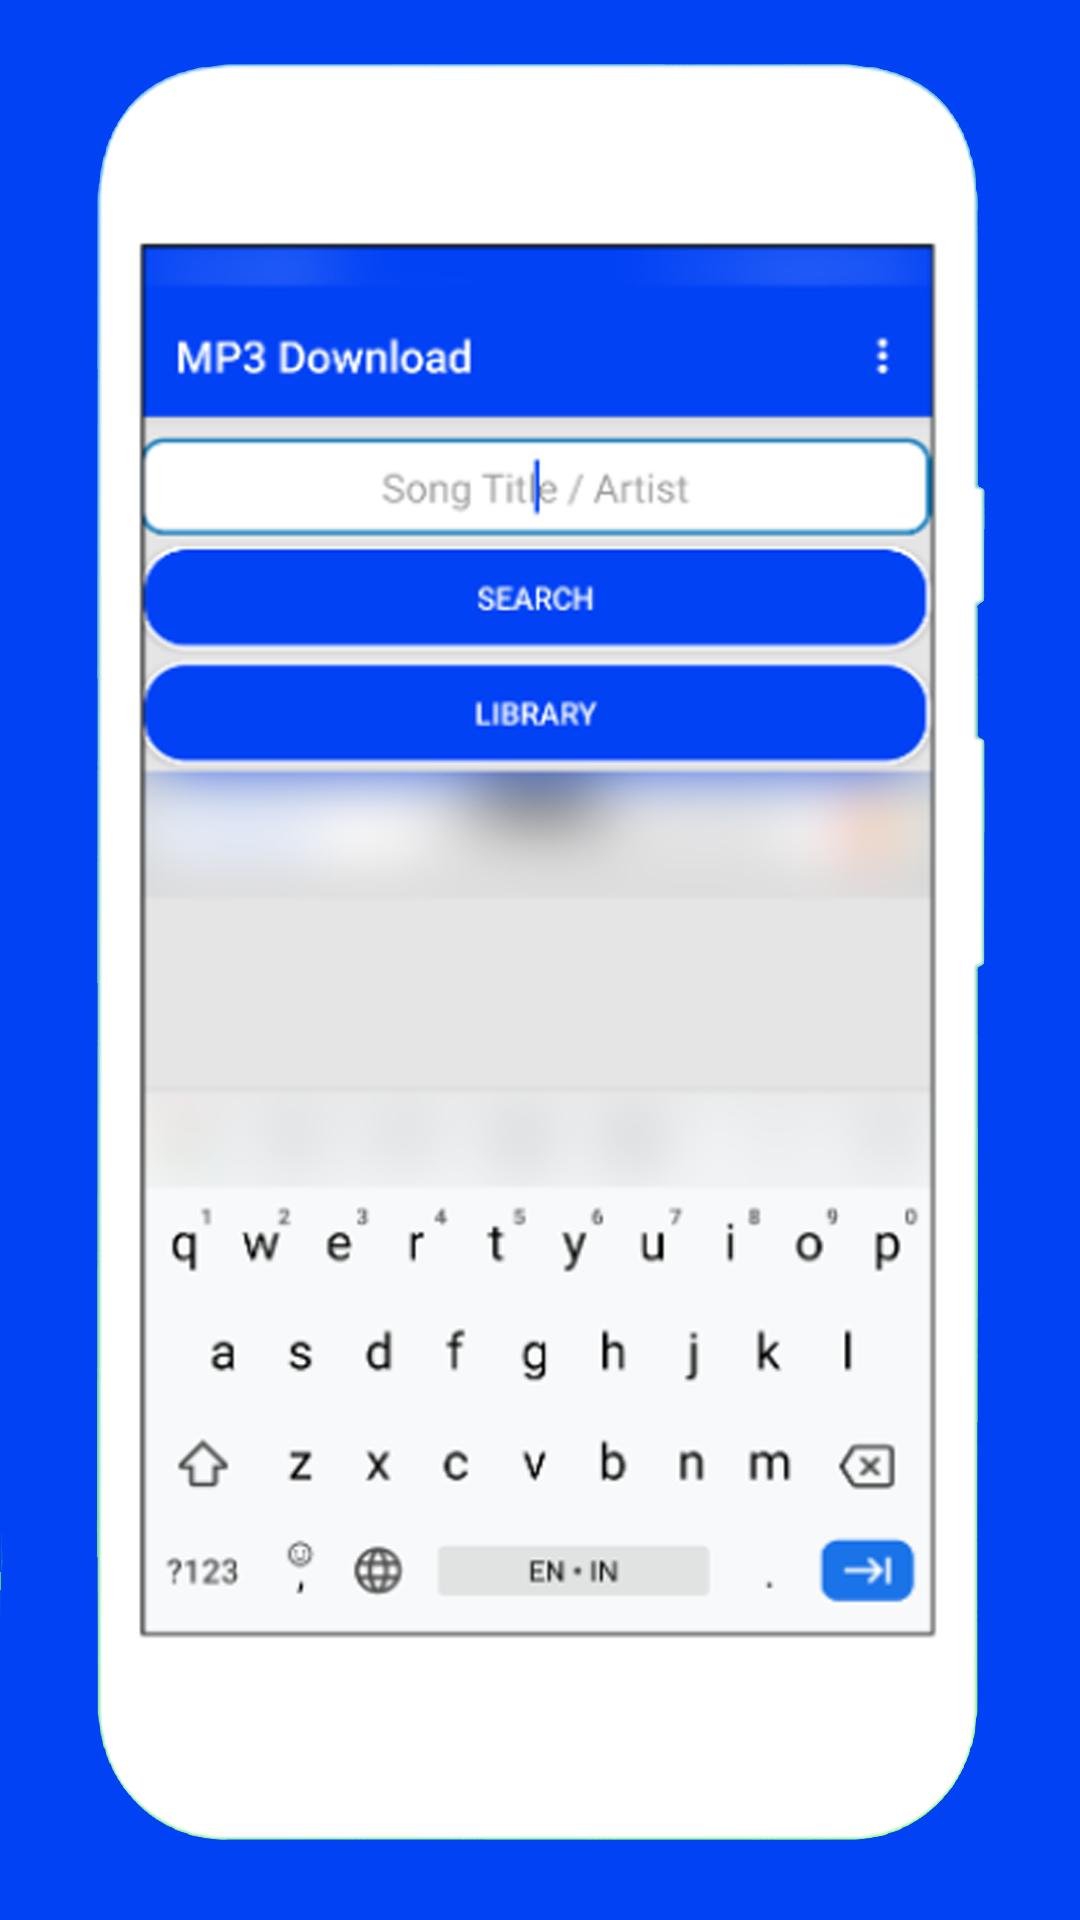 TUBlDY_MP3 Free & MP3 Player for Android - APK Download